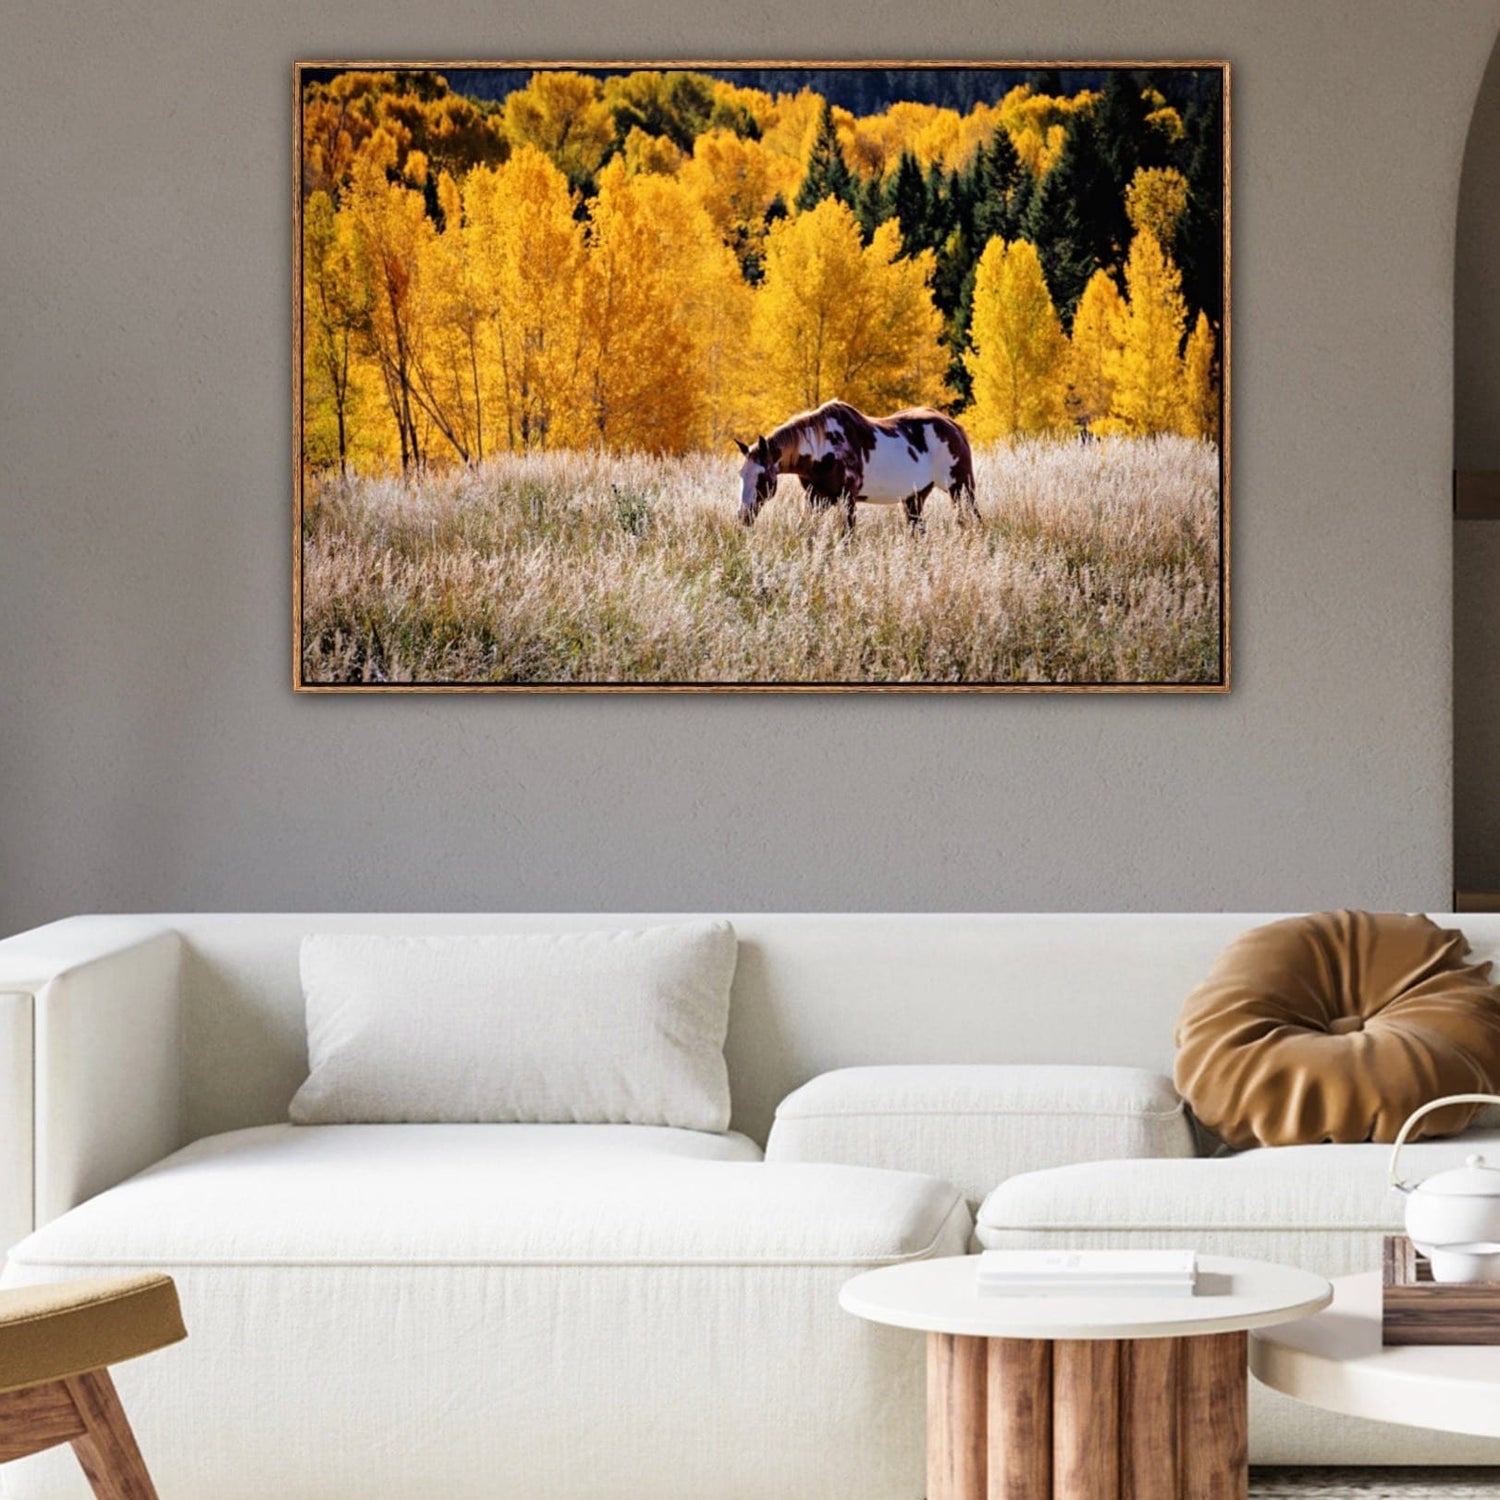 photo of a paint horse walking in tall grass with yellow aspen trees in the background